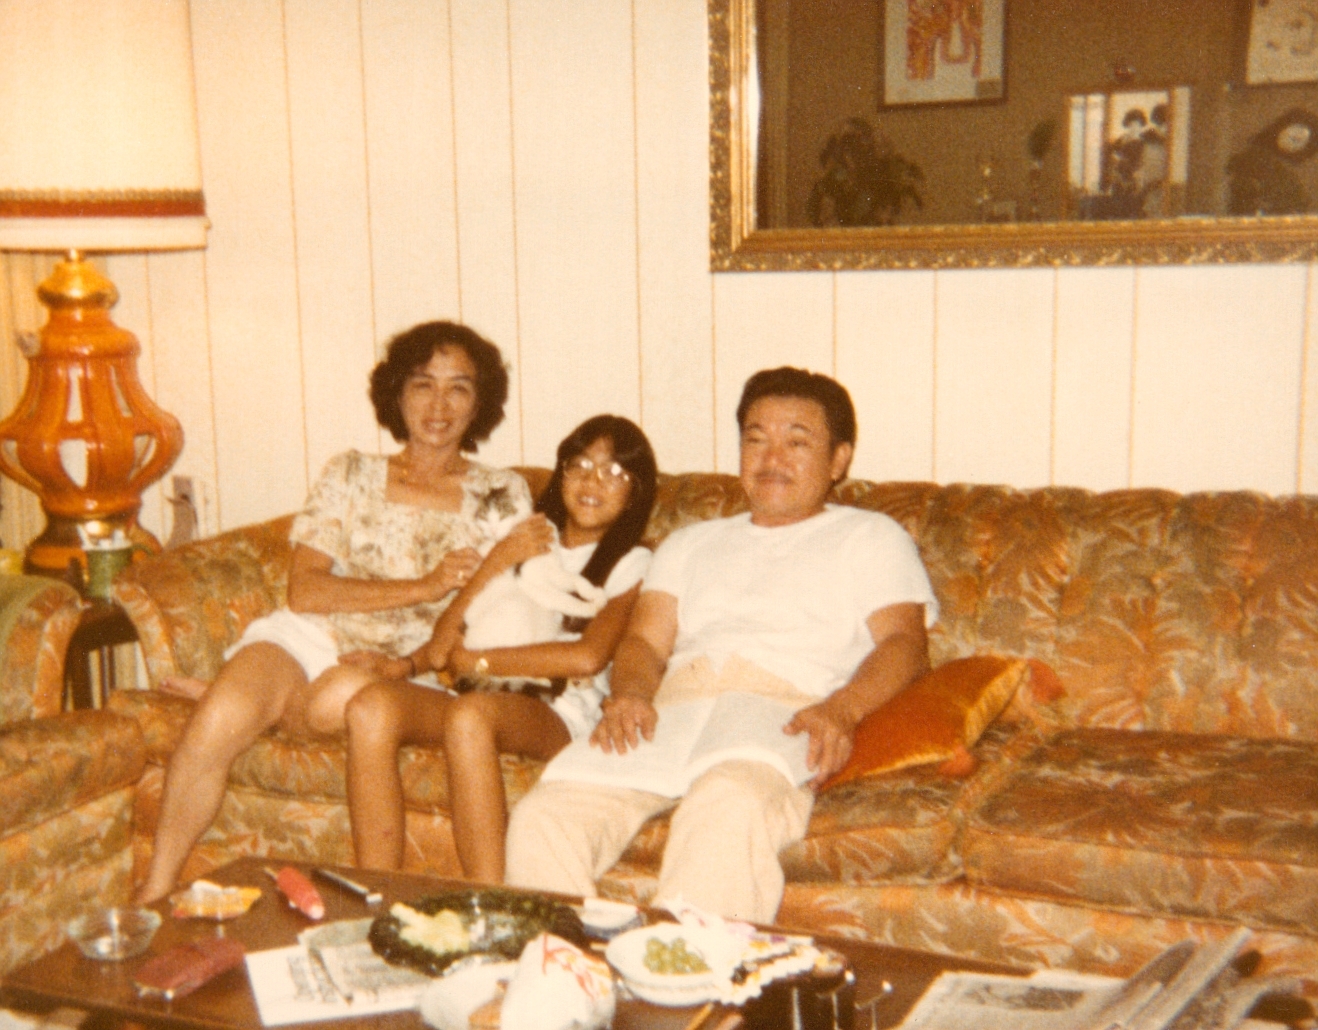 Vicki as a child with her parents.